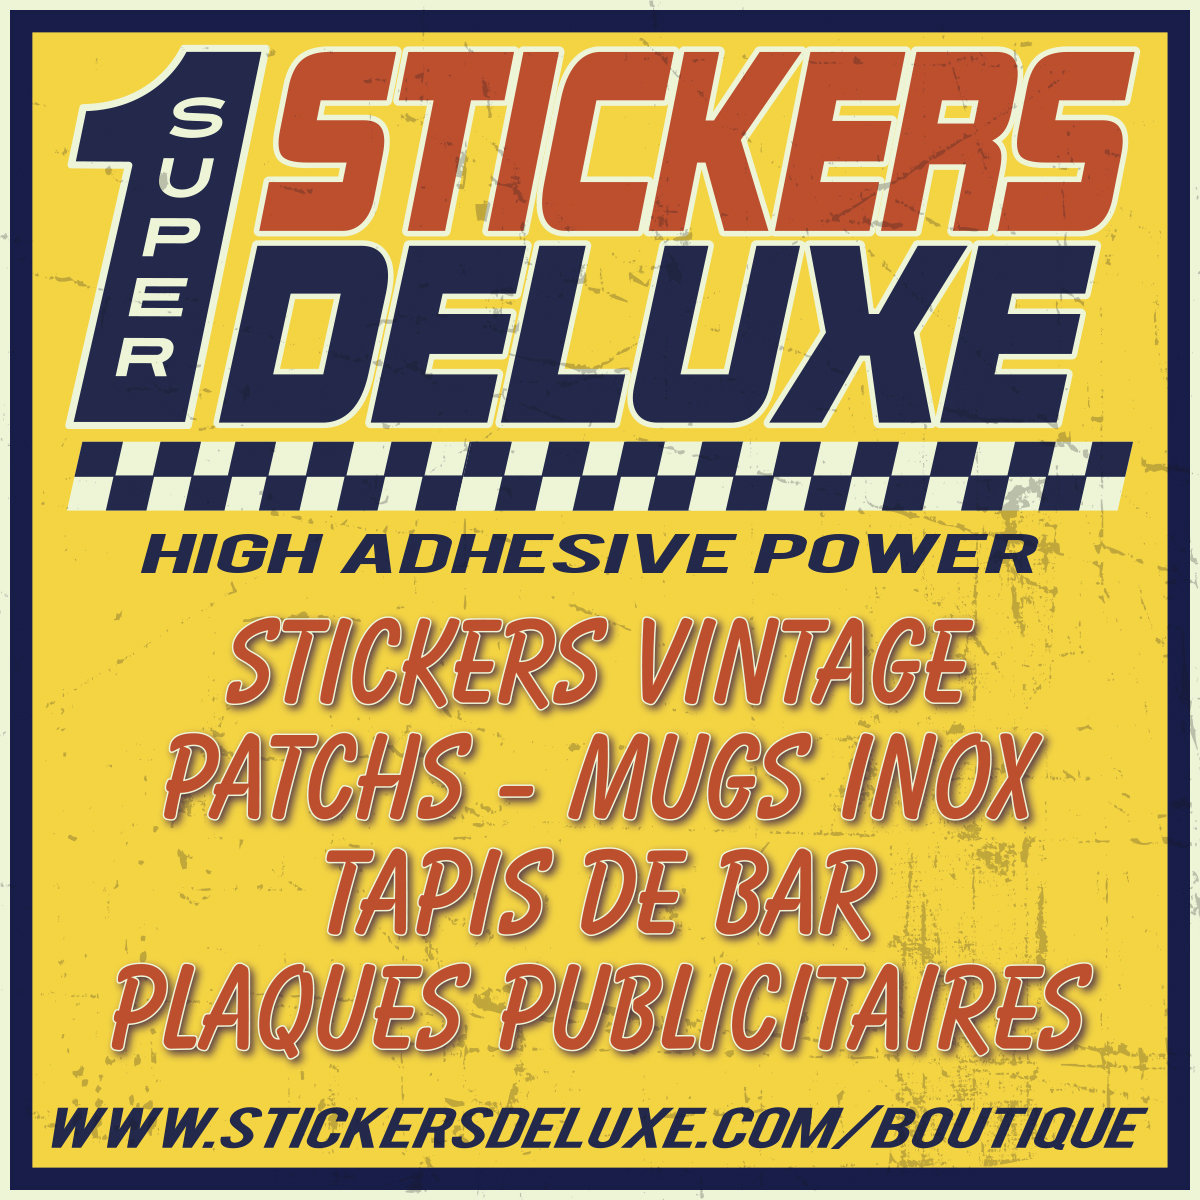 Stickers Deluxe
Stickers & apparel, finest quality...